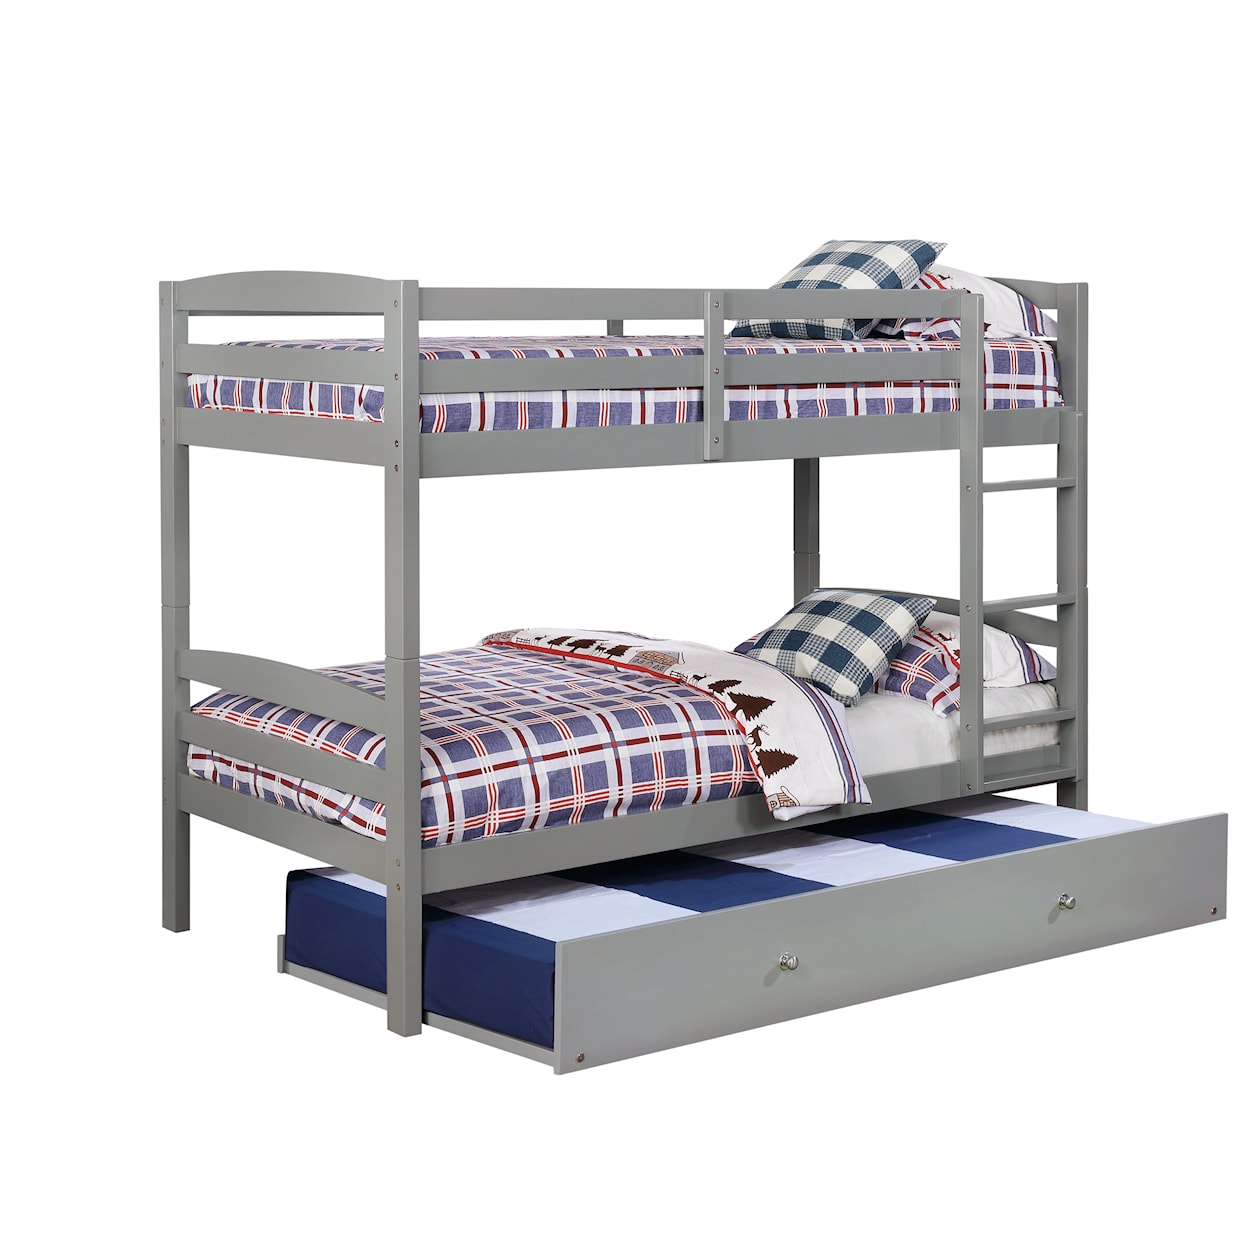 Lifestyle CB80 Twin Over Twin Bunk Bed with Trundle